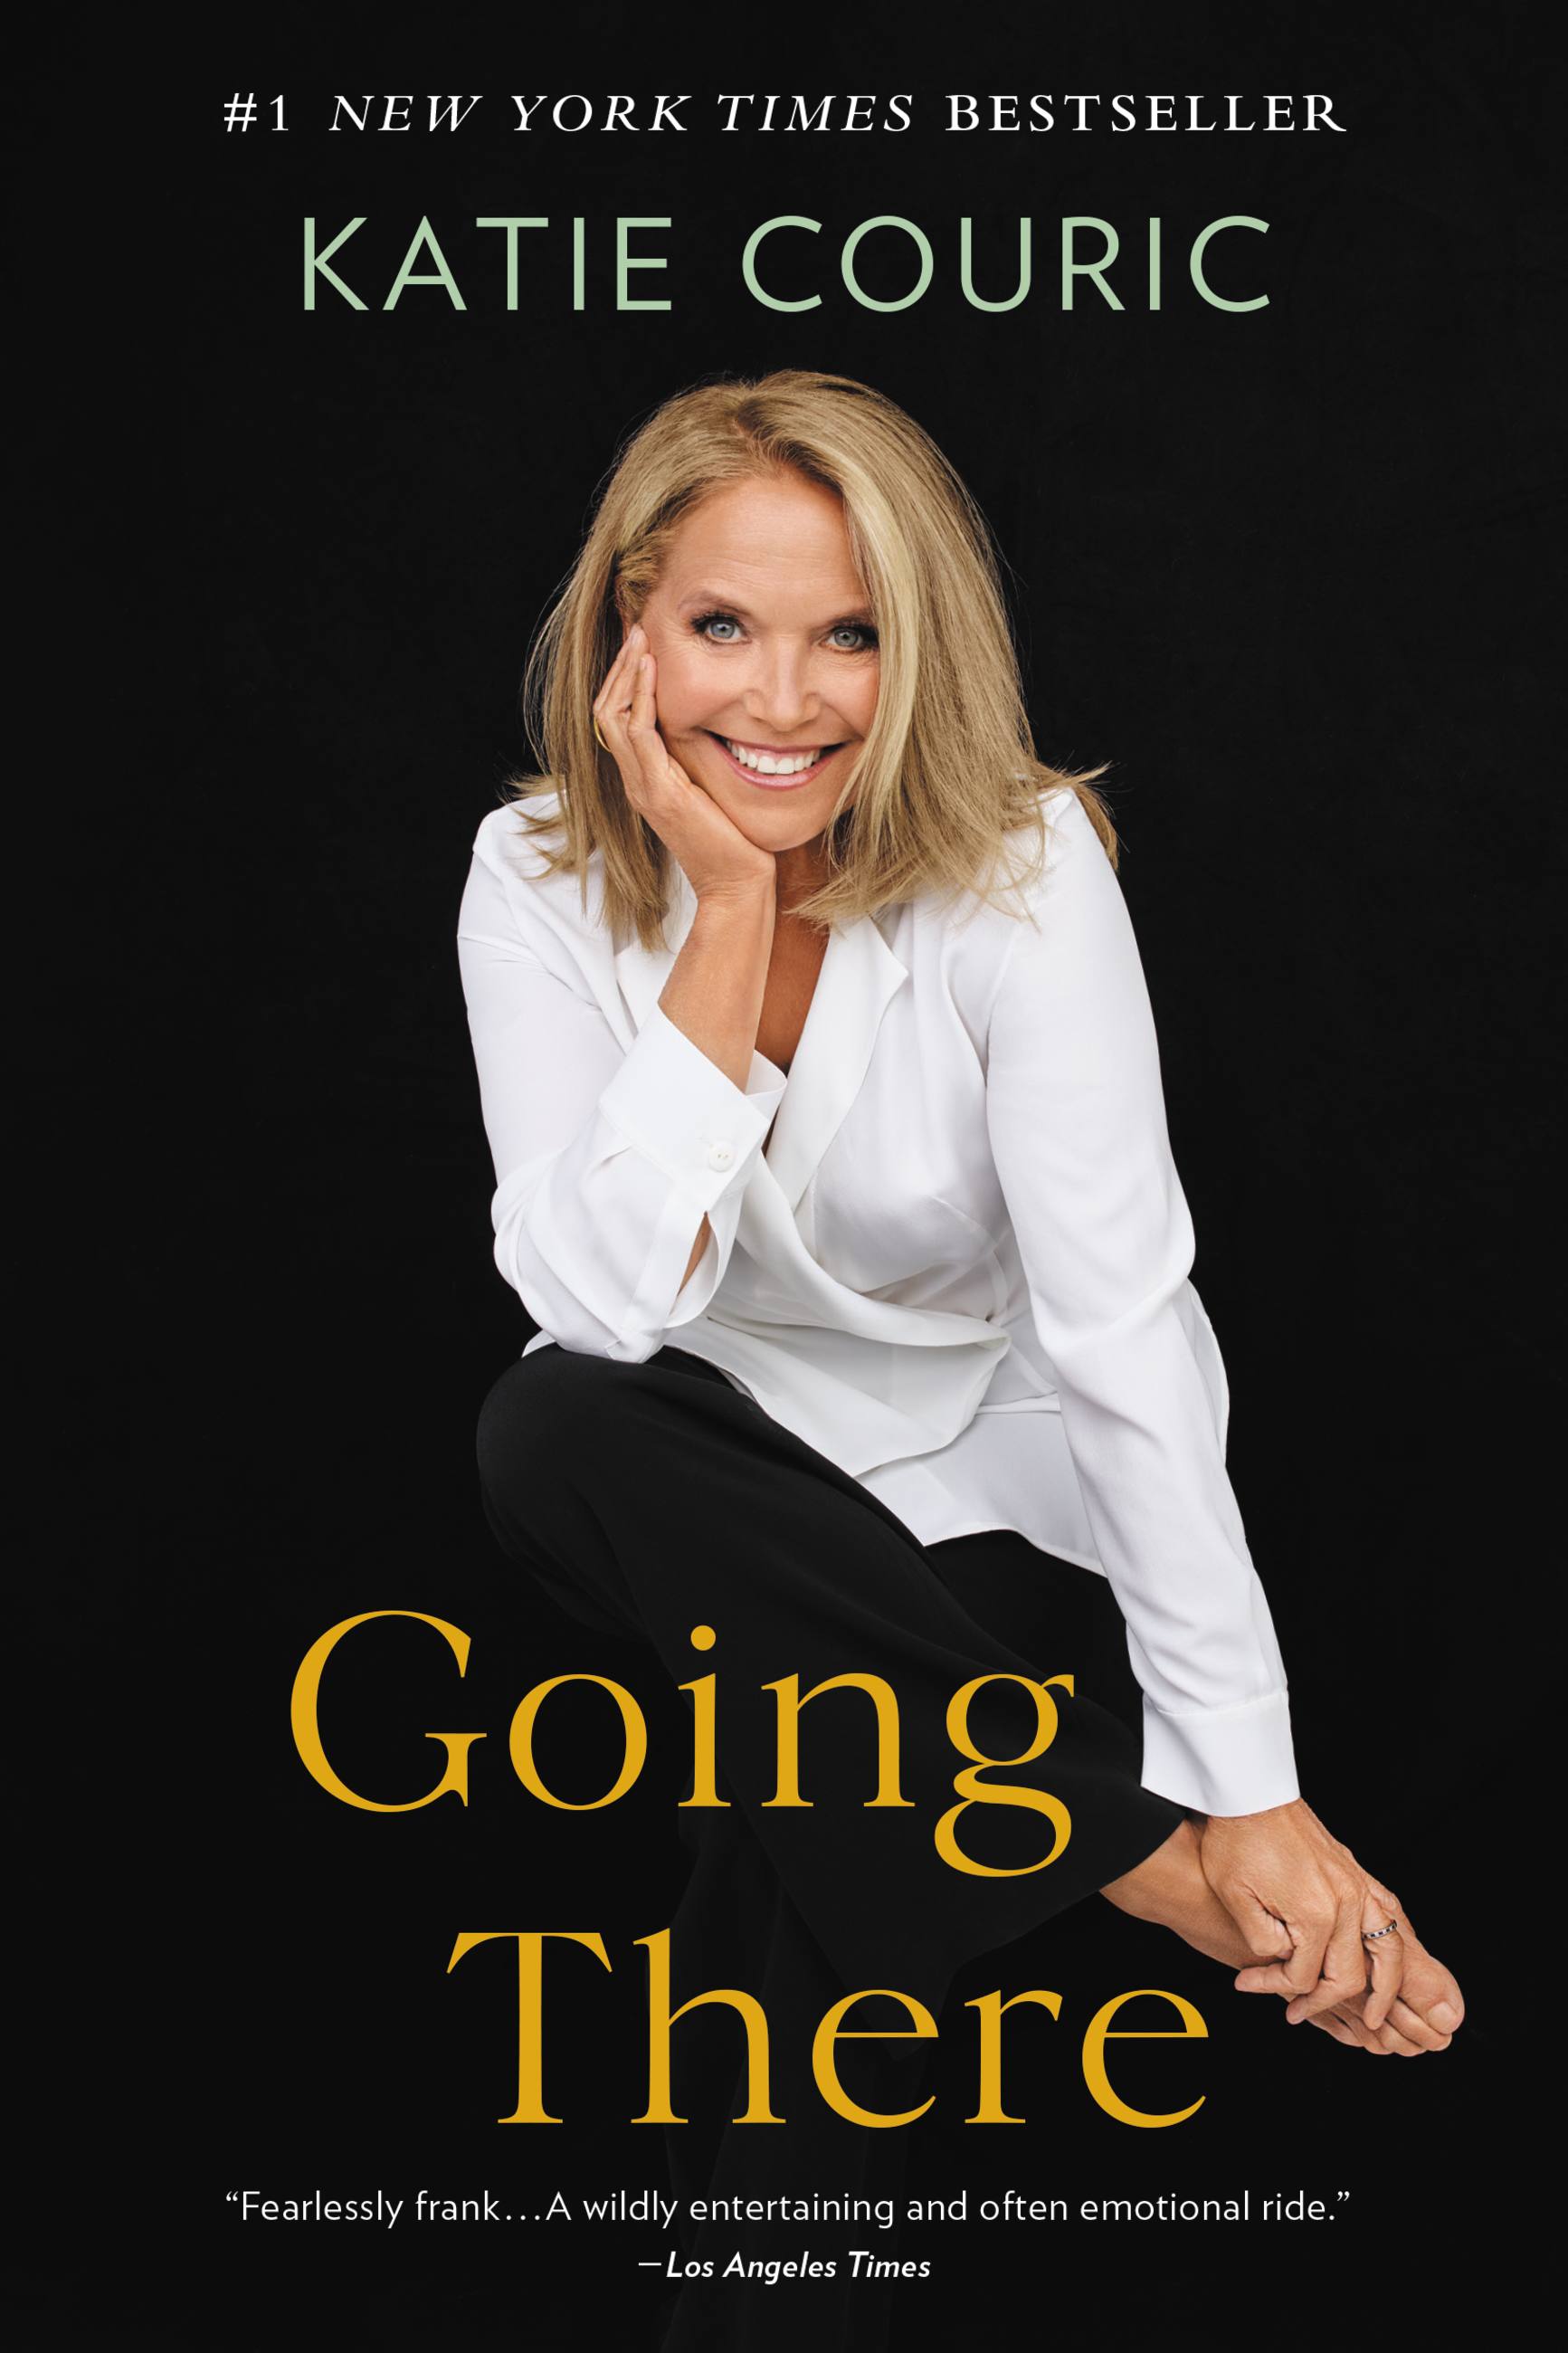 Going There by Katie Couric | Hachette Book Group